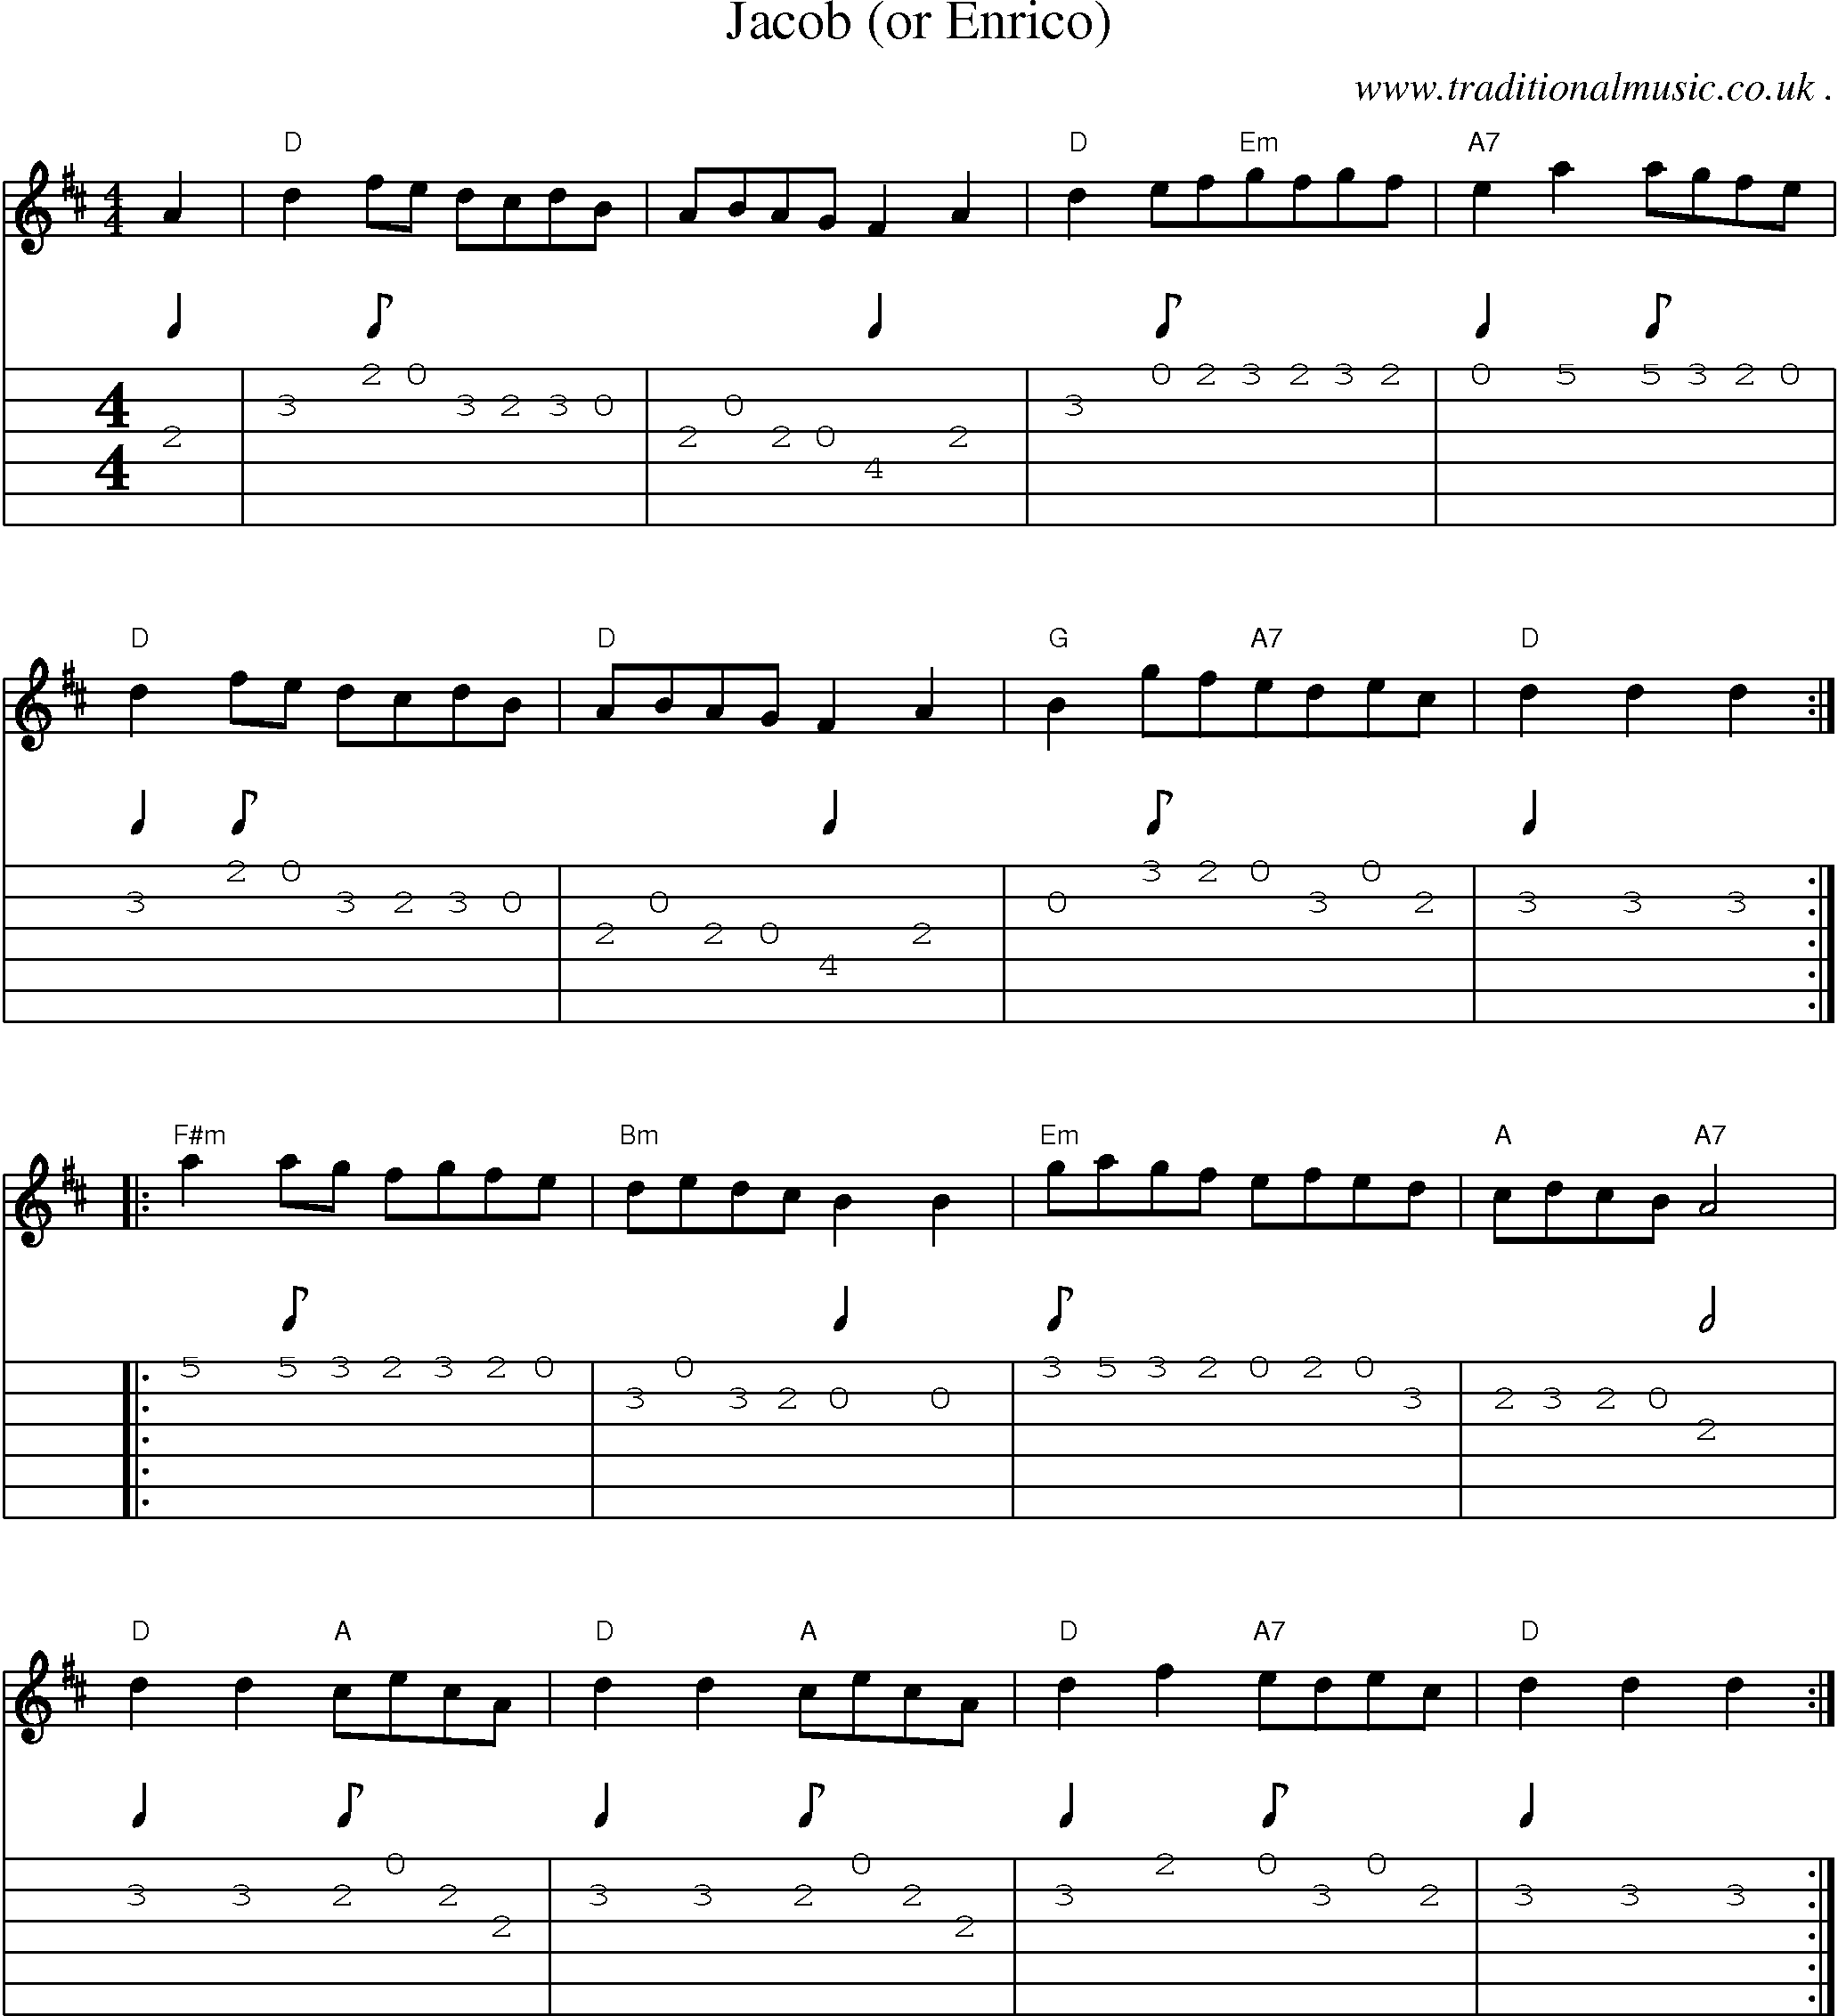 Sheet-Music and Guitar Tabs for Jacob (or Enrico)